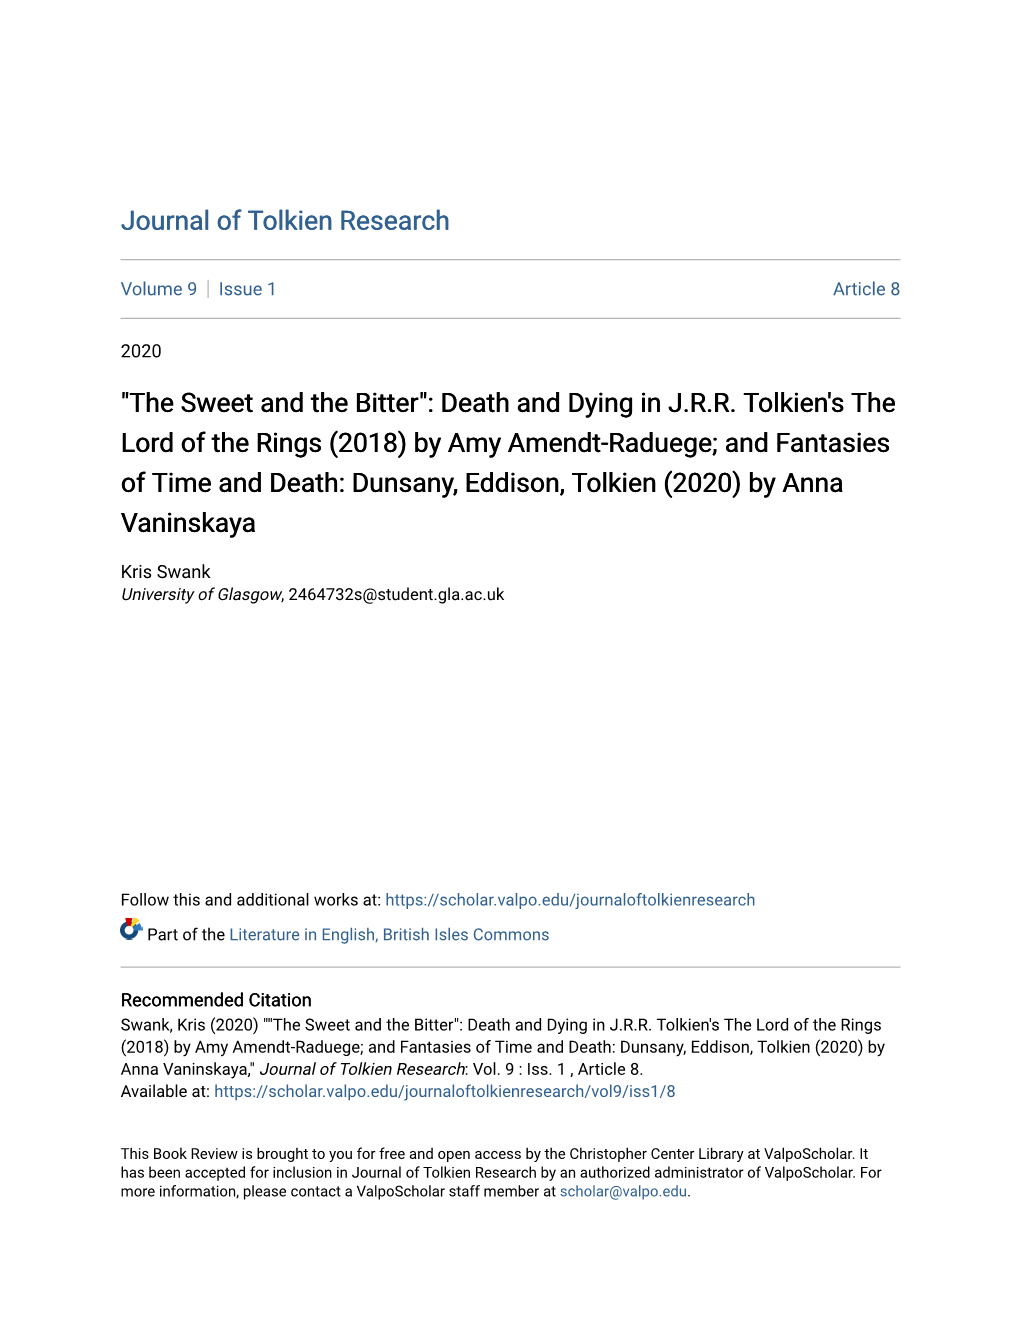 "The Sweet and the Bitter": Death and Dying in J.R.R. Tolkien's the Lord of the Rings (2018) by Amy Amendt-Raduege